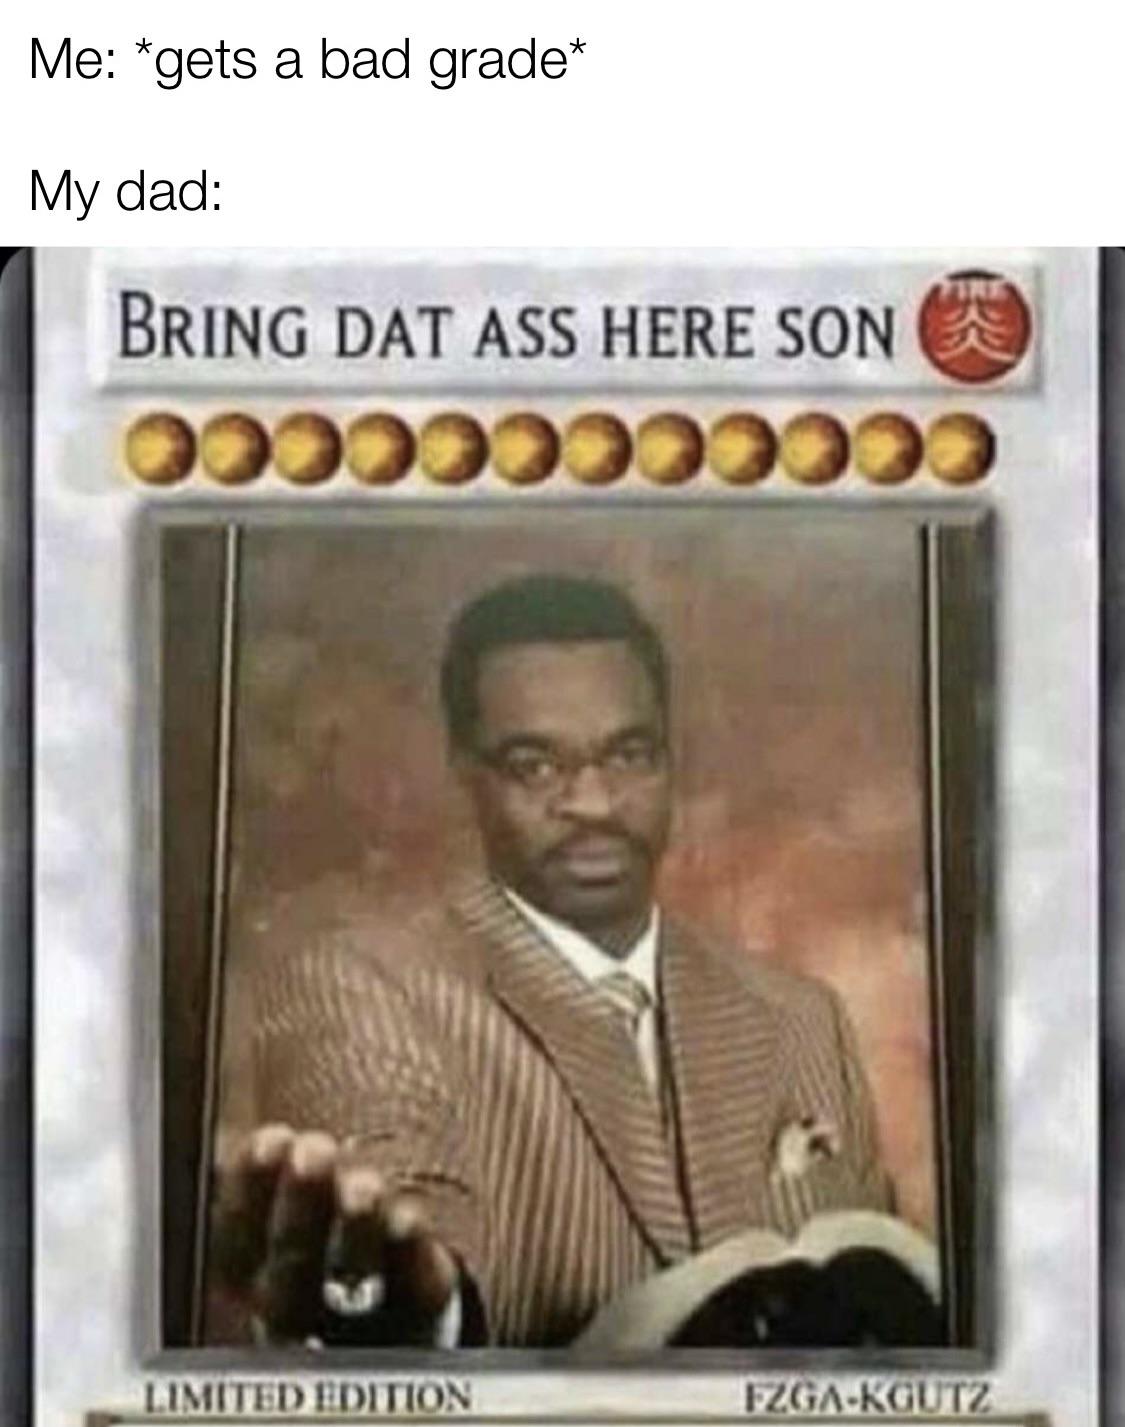 yougio card memes - Me gets a bad grade My dad Bring Dat Ass Here Son > Limited Edition FzgaKgutz